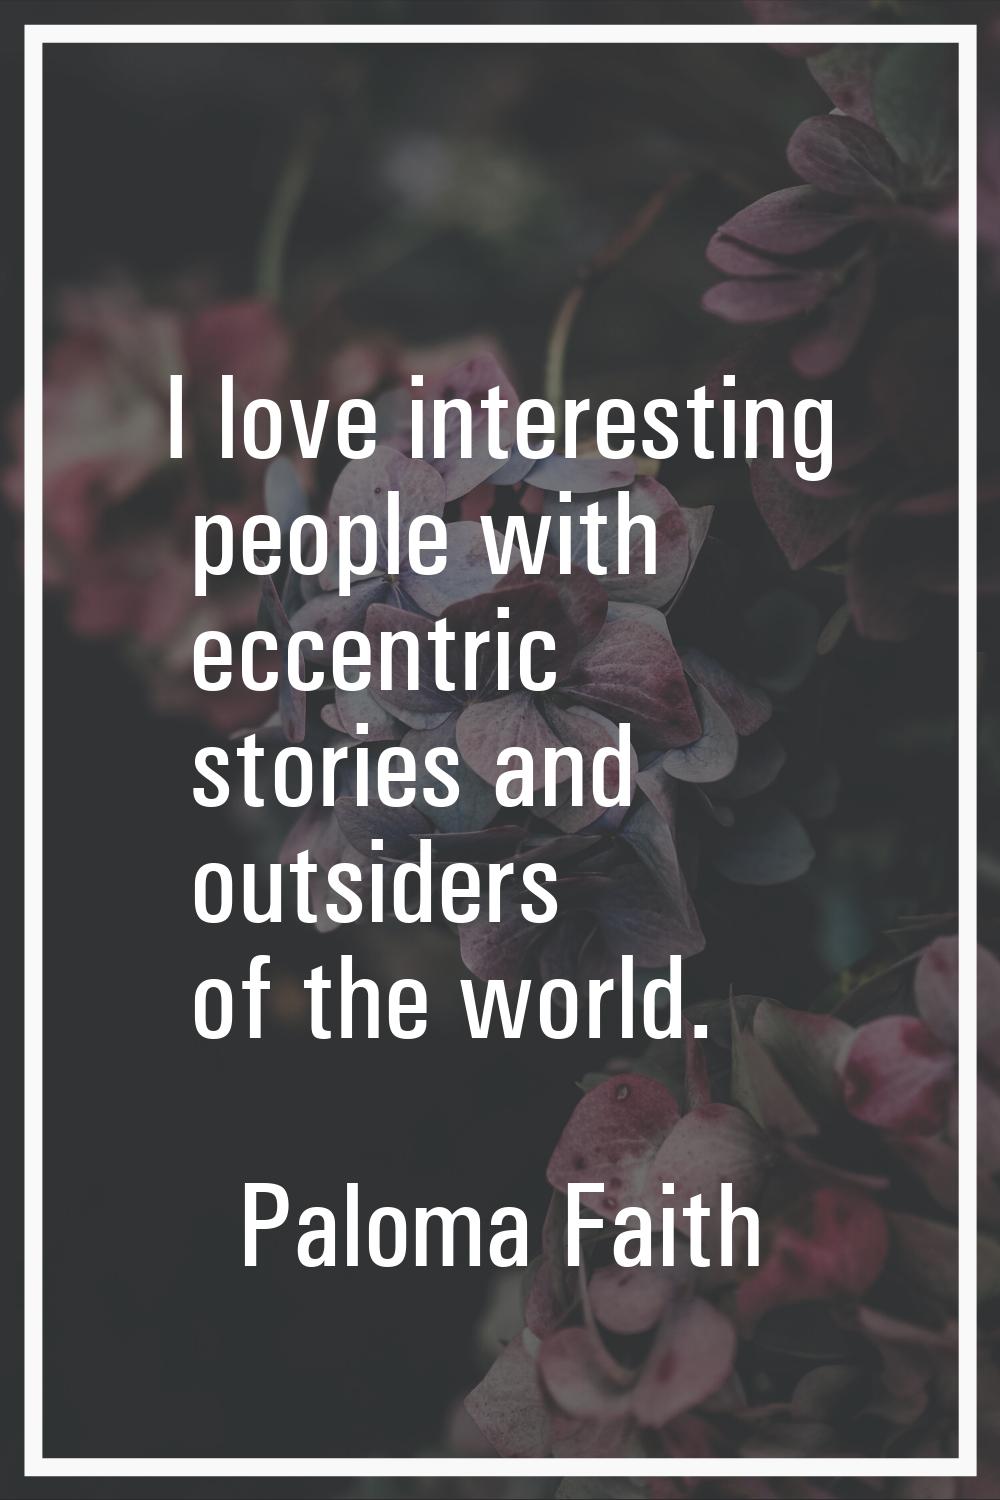 I love interesting people with eccentric stories and outsiders of the world.